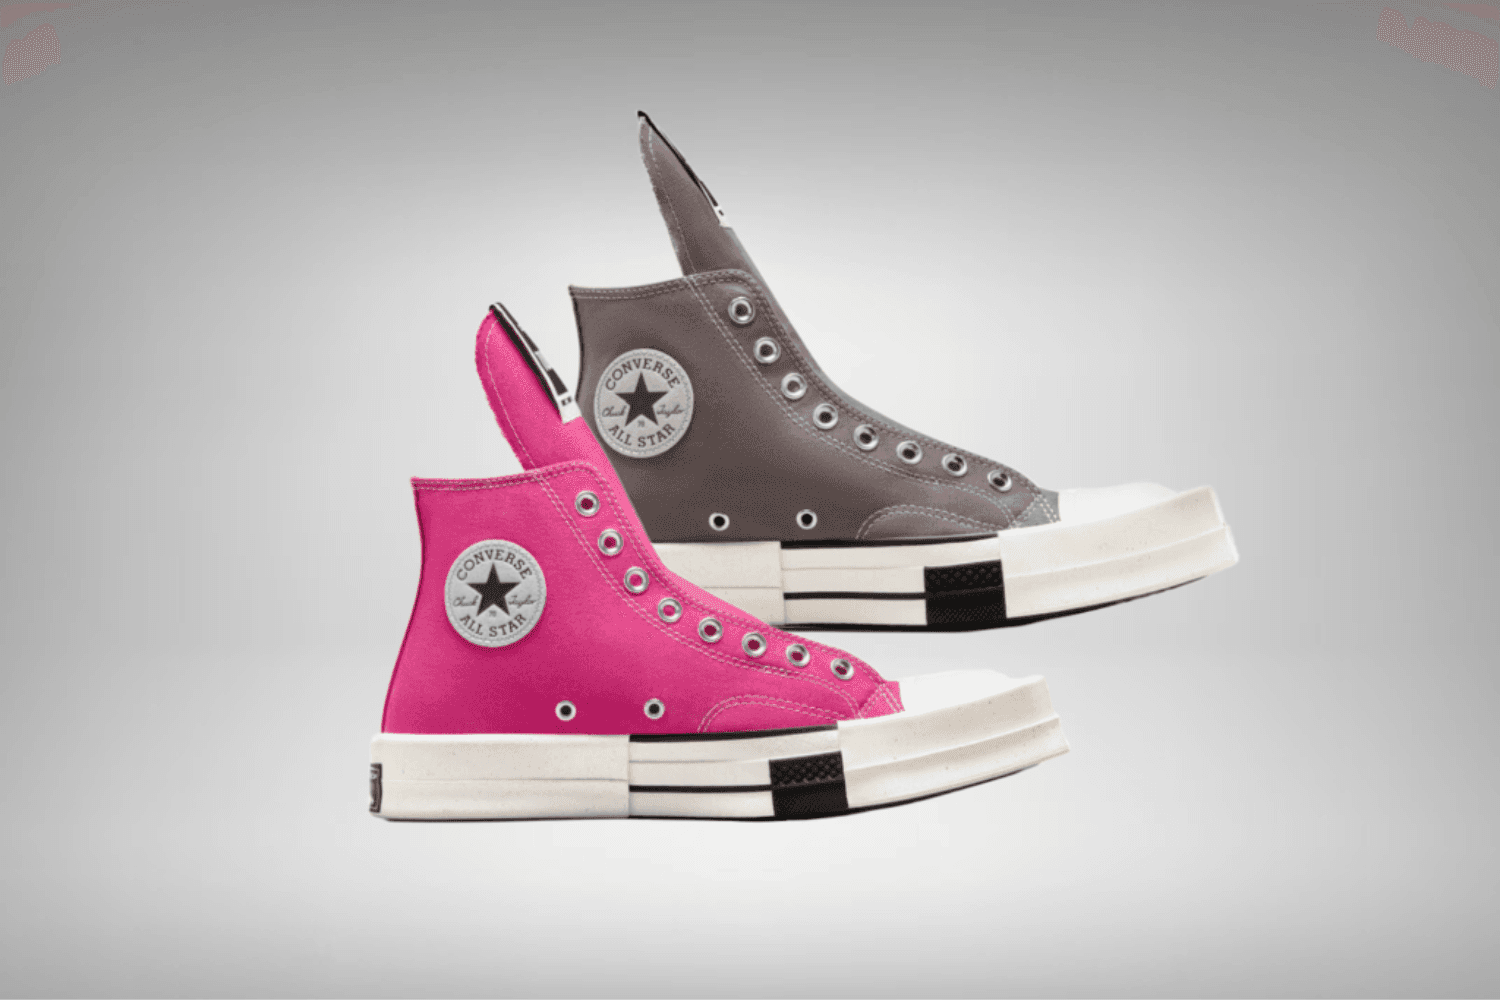 Check out the TURBODRK x Converse Chuck 70 collab